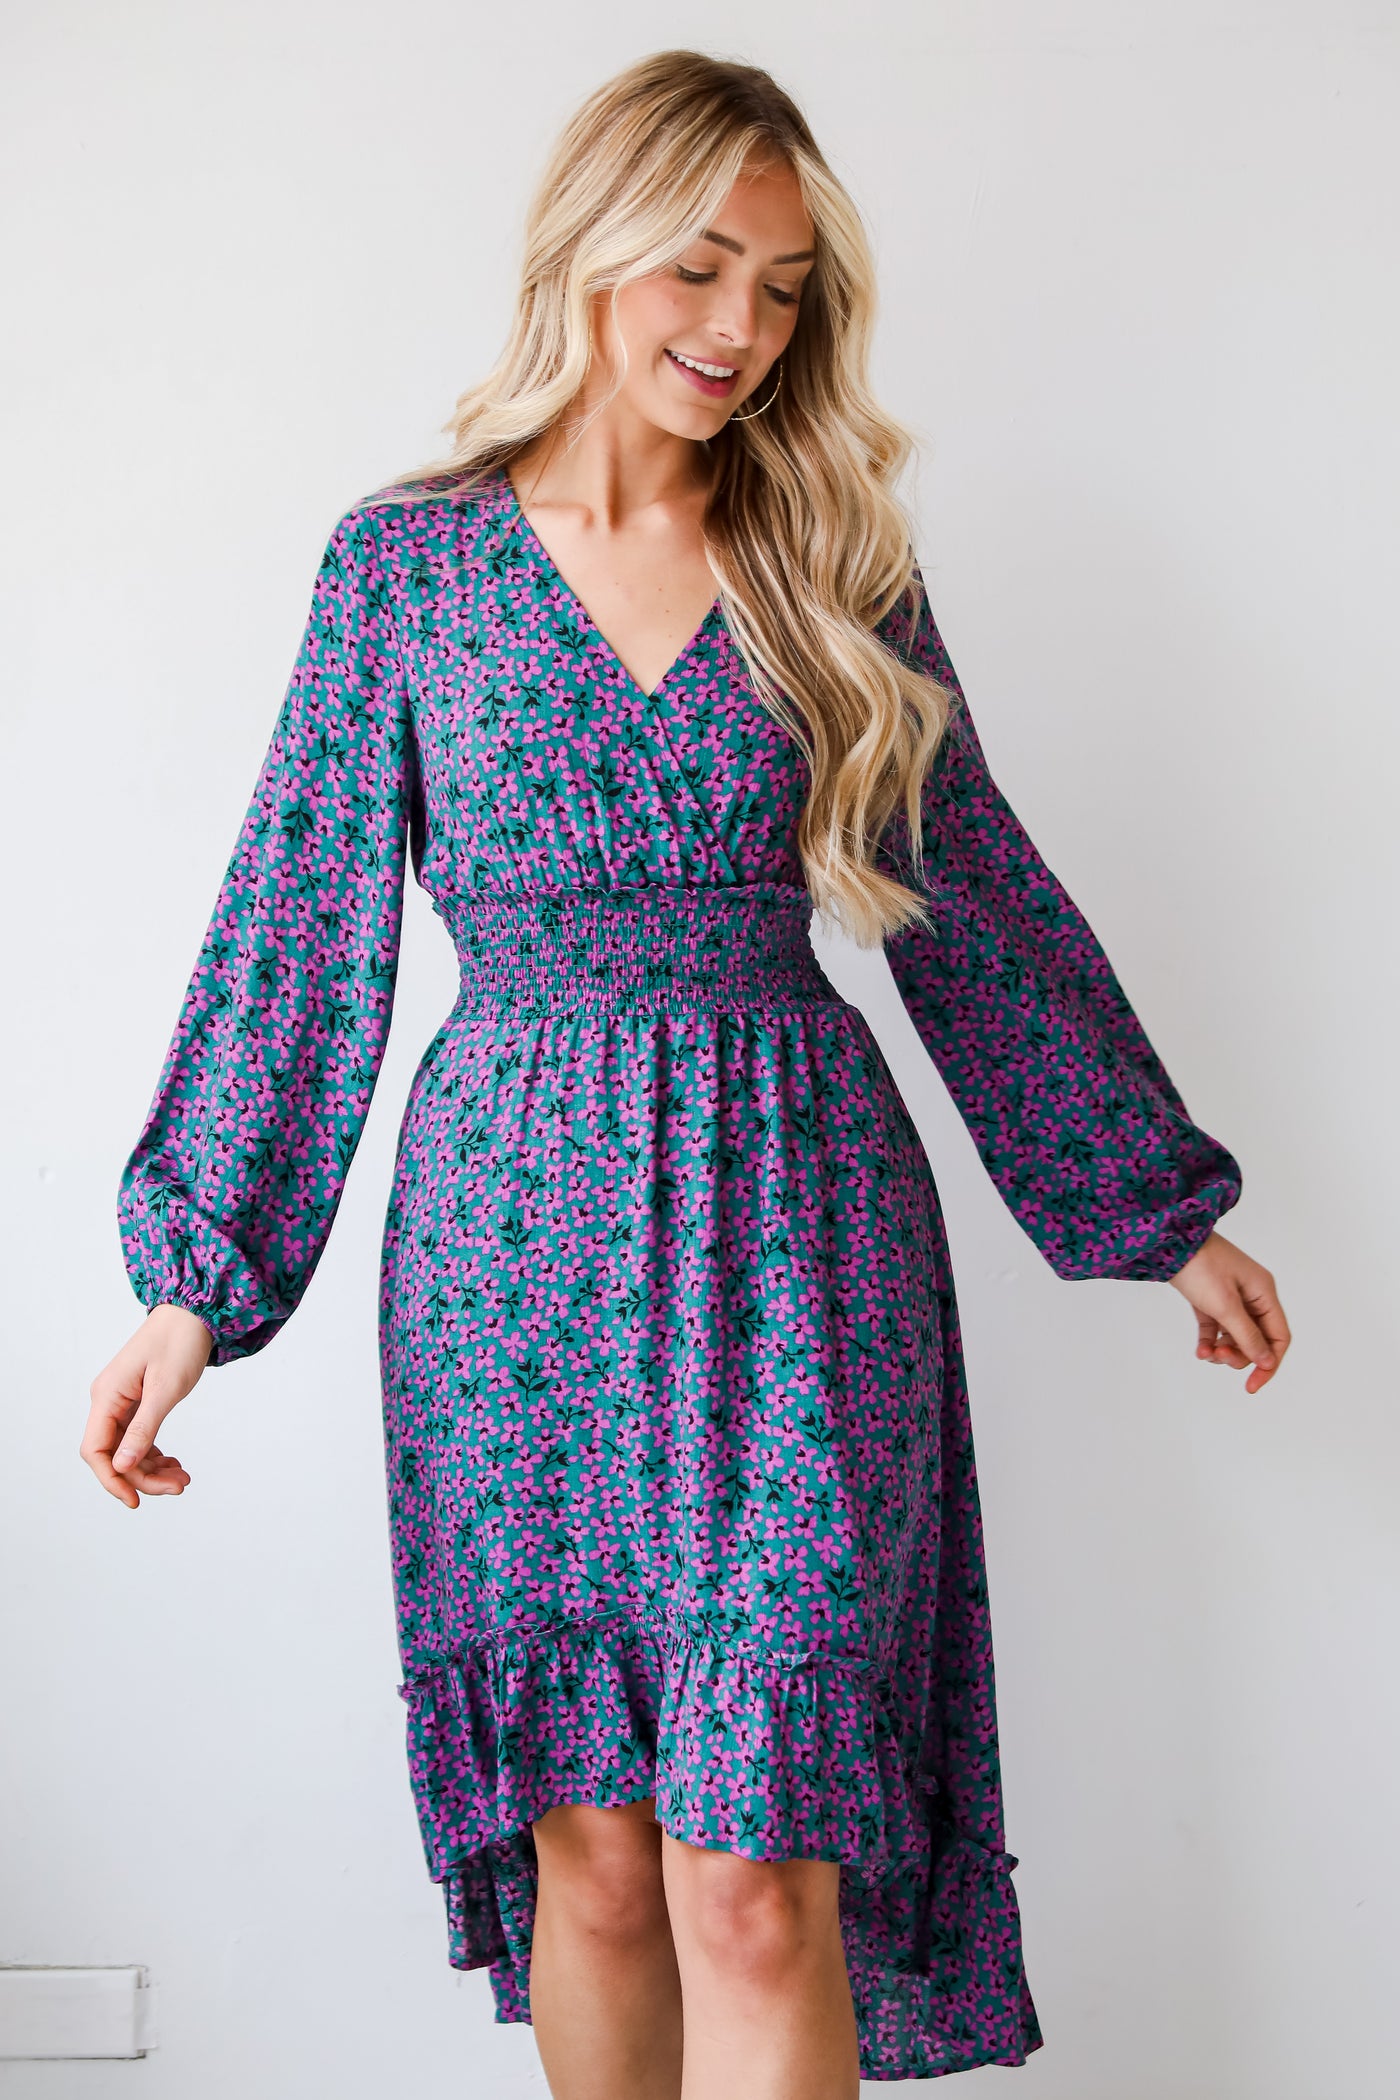 Teal Floral Midi Dress for women